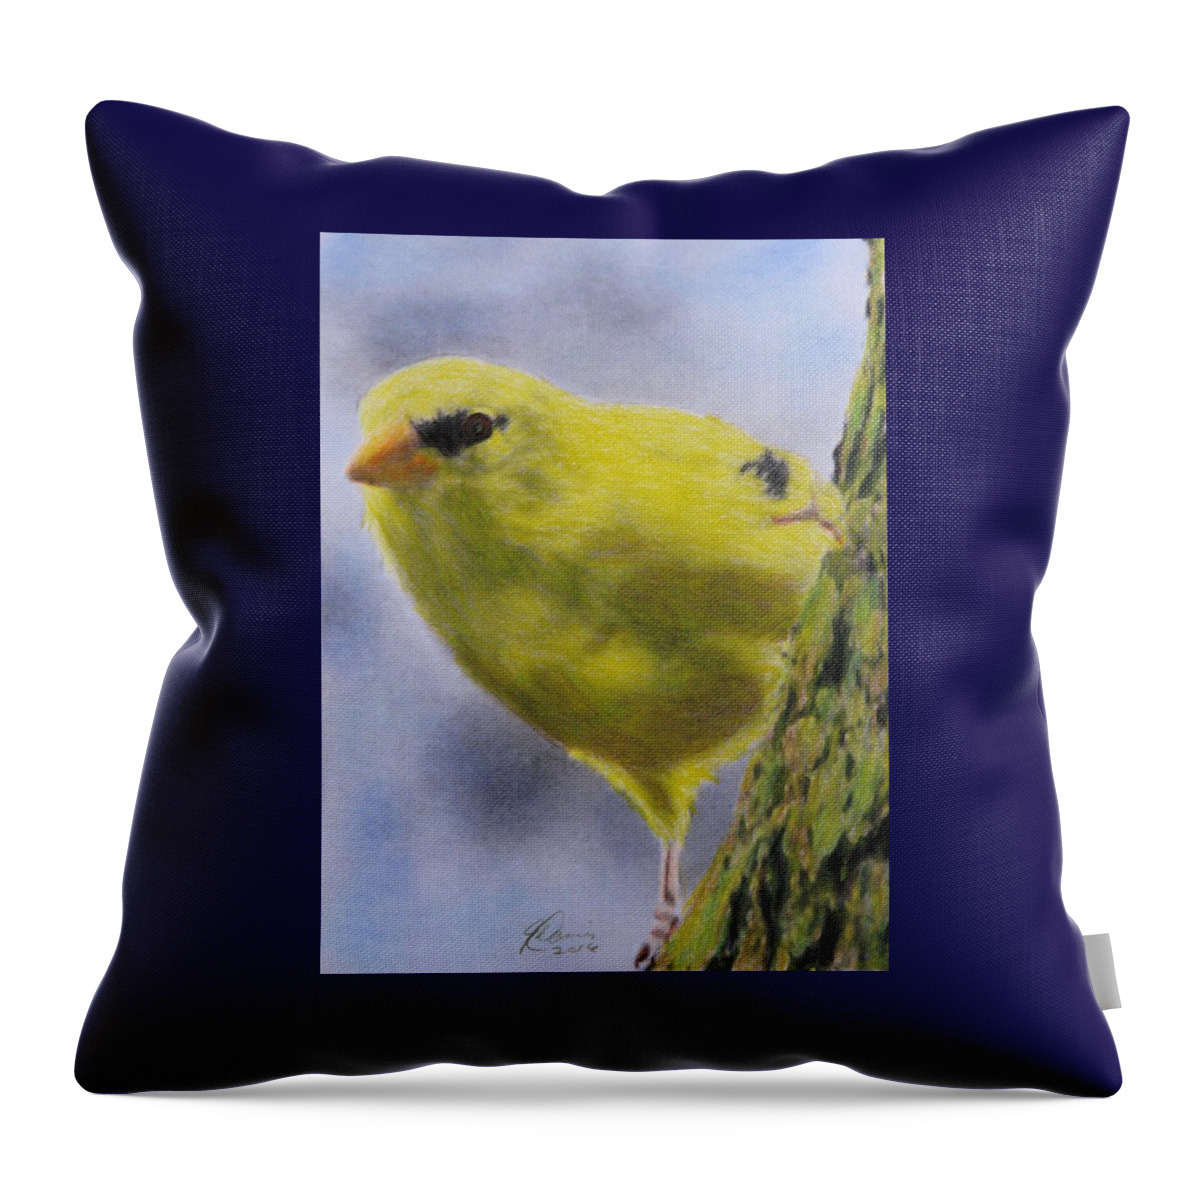 North American Goldfinch Drawings Throw Pillow featuring the drawing Peek A Boo by Angela Davies